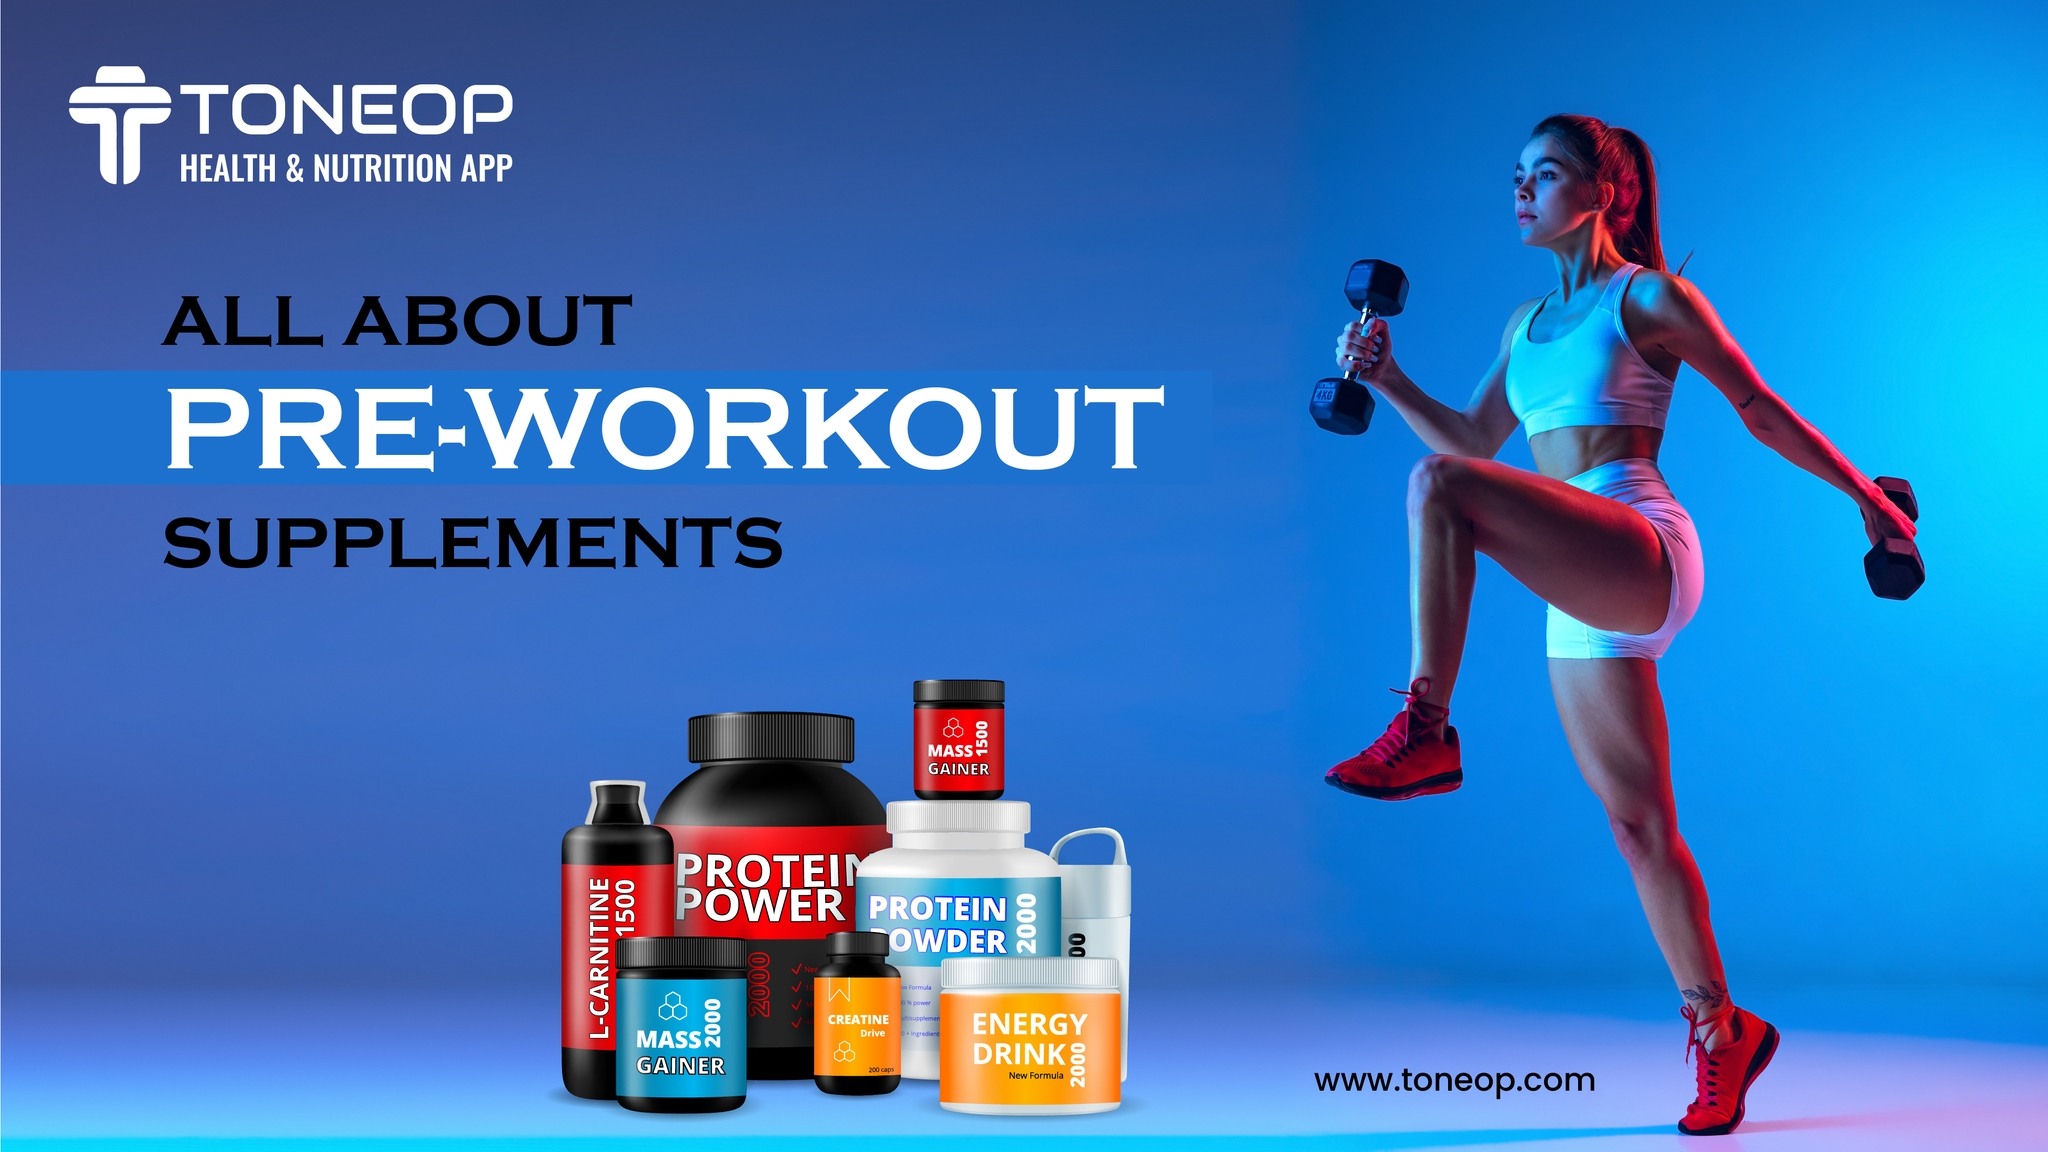 All About Pre- Workout Supplements